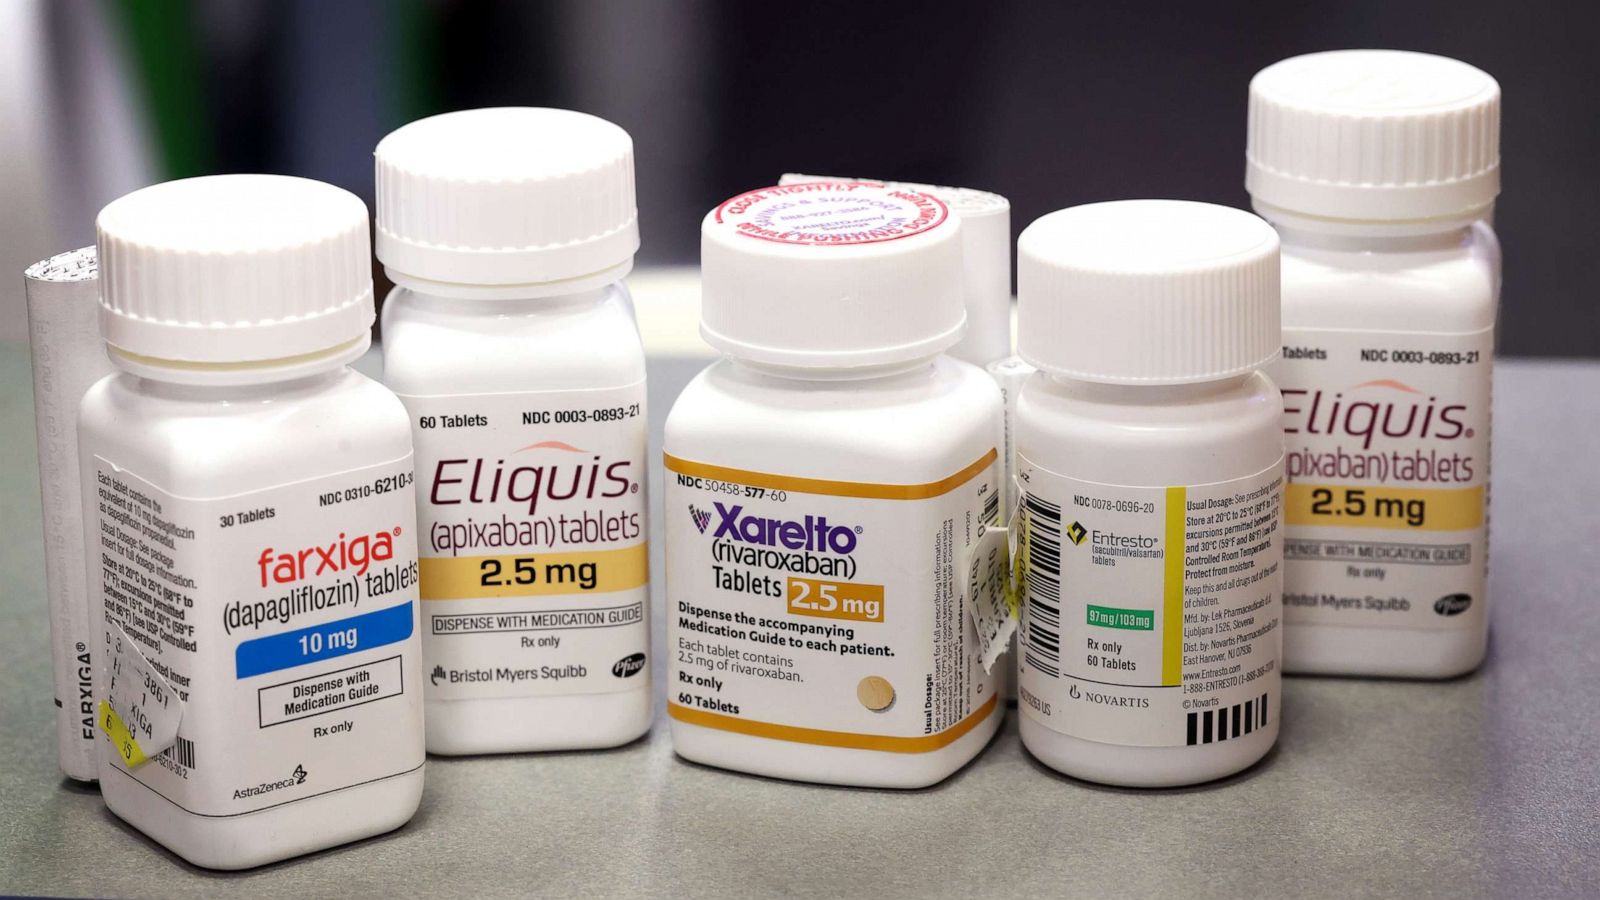 Medicare to Implement Price Reductions for Key Diabetes Medications | Med Supply US